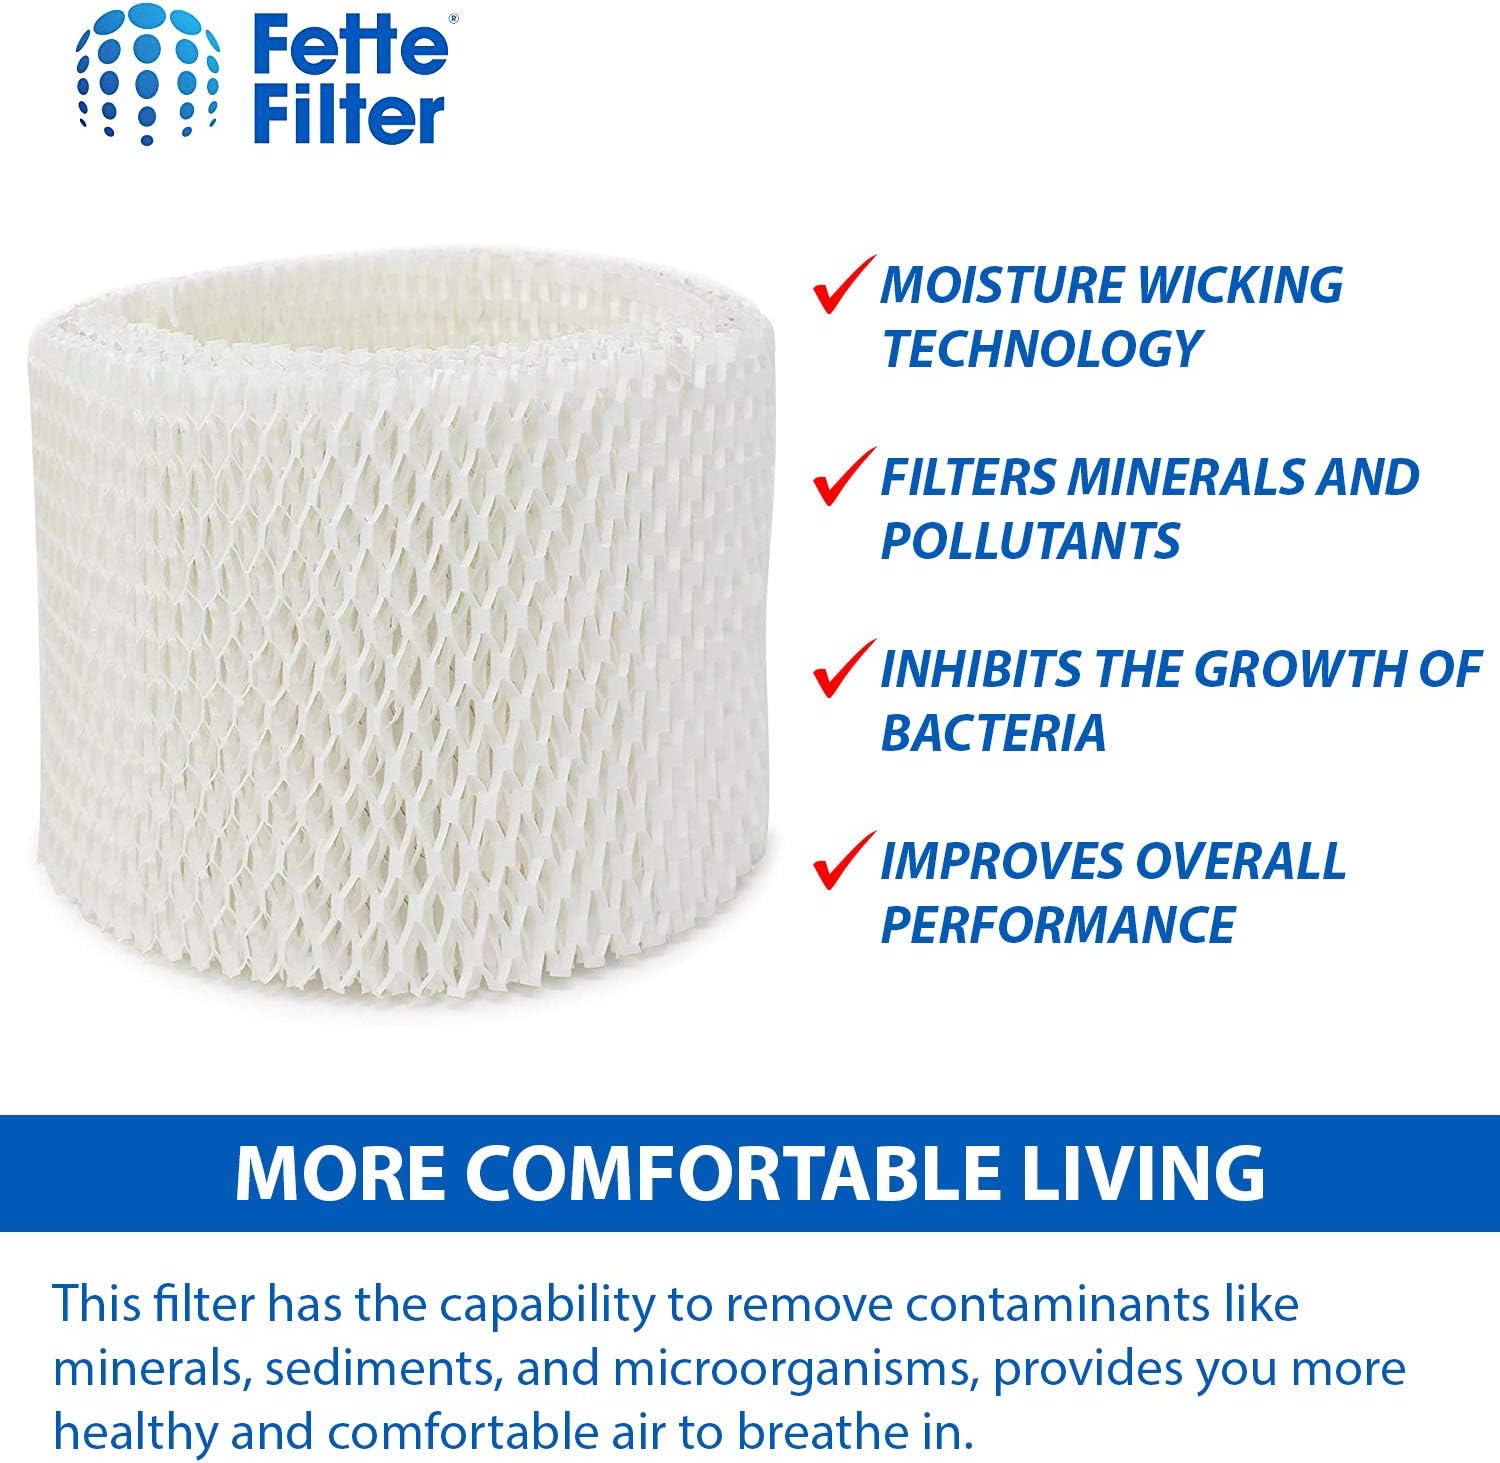 Fette Filter &#226;&#128;&#147; Humidifier Wicking Filters Compatible with Vicks